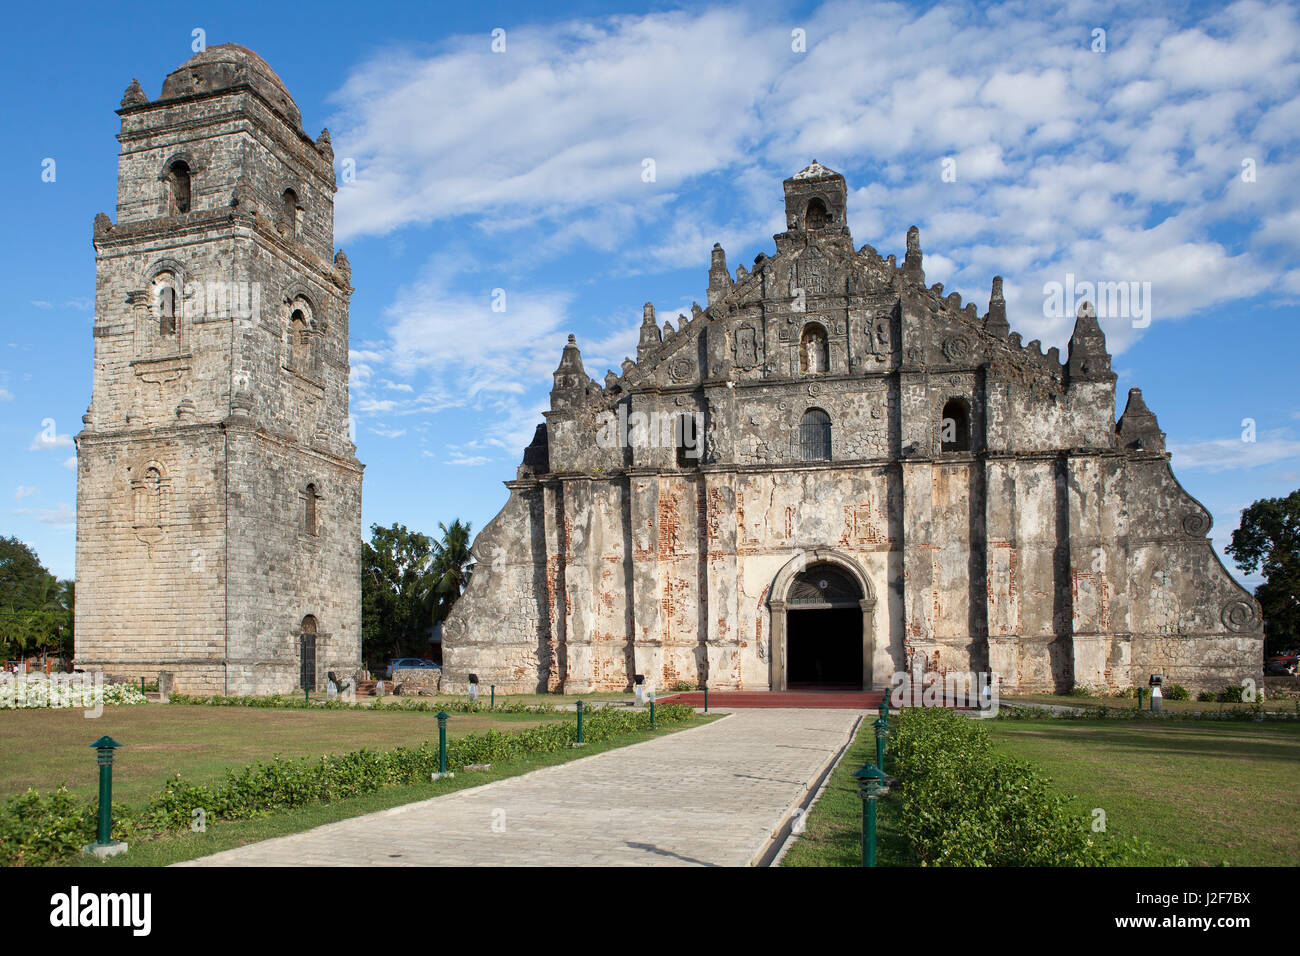 The Church of San Augustin, known as Paoay Church is a 18th century church in the Philippines Paoay church in the northern province of Ilocos Norte. Four Baroque Churches of the Philippines, including the church, are since 1993 on the UNESCO World Heritage Site because of its unique combination of baroque and oriental styles. The style in which this church is built is also referred to as Earthquake Baroque. Stock Photo